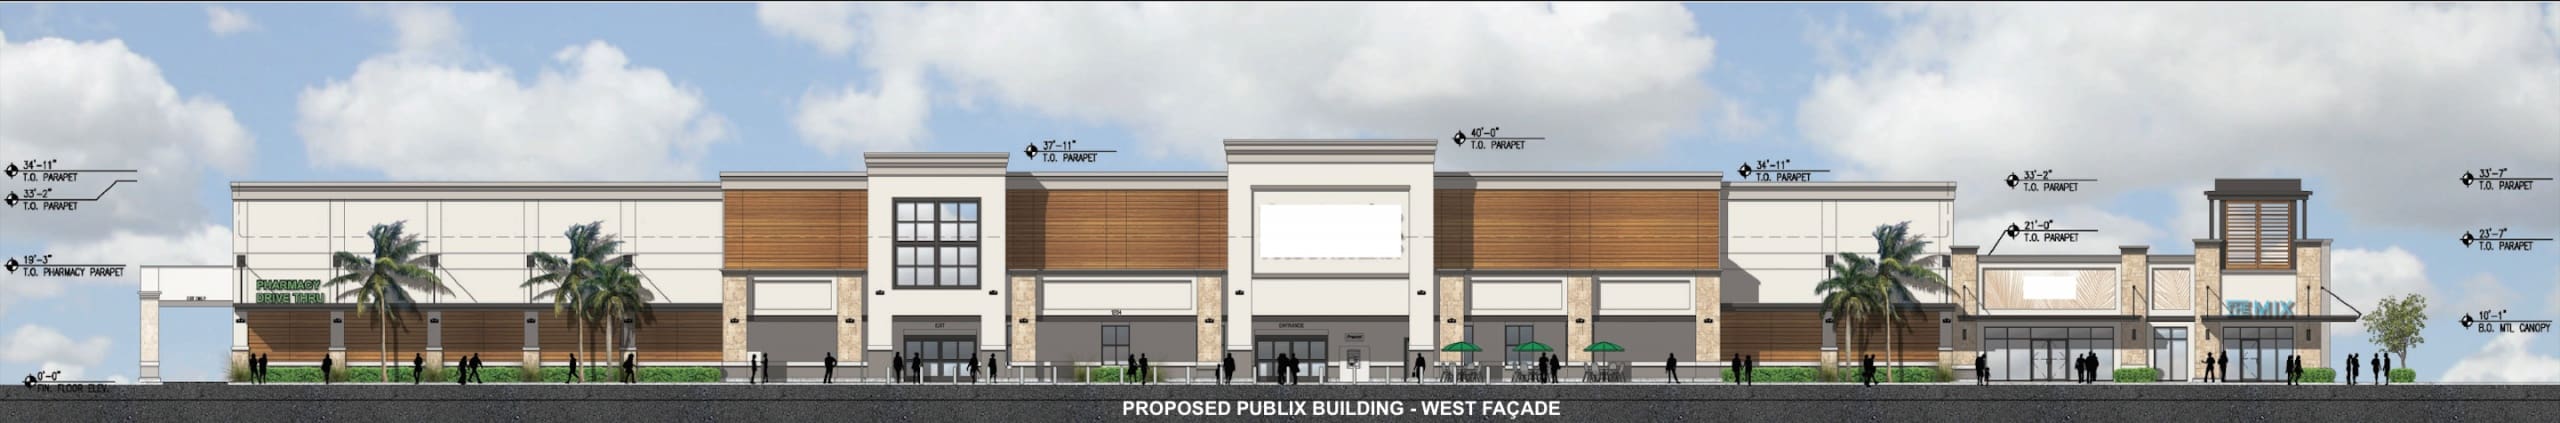 West façade of new Publix building proposed for Isle Casino property.